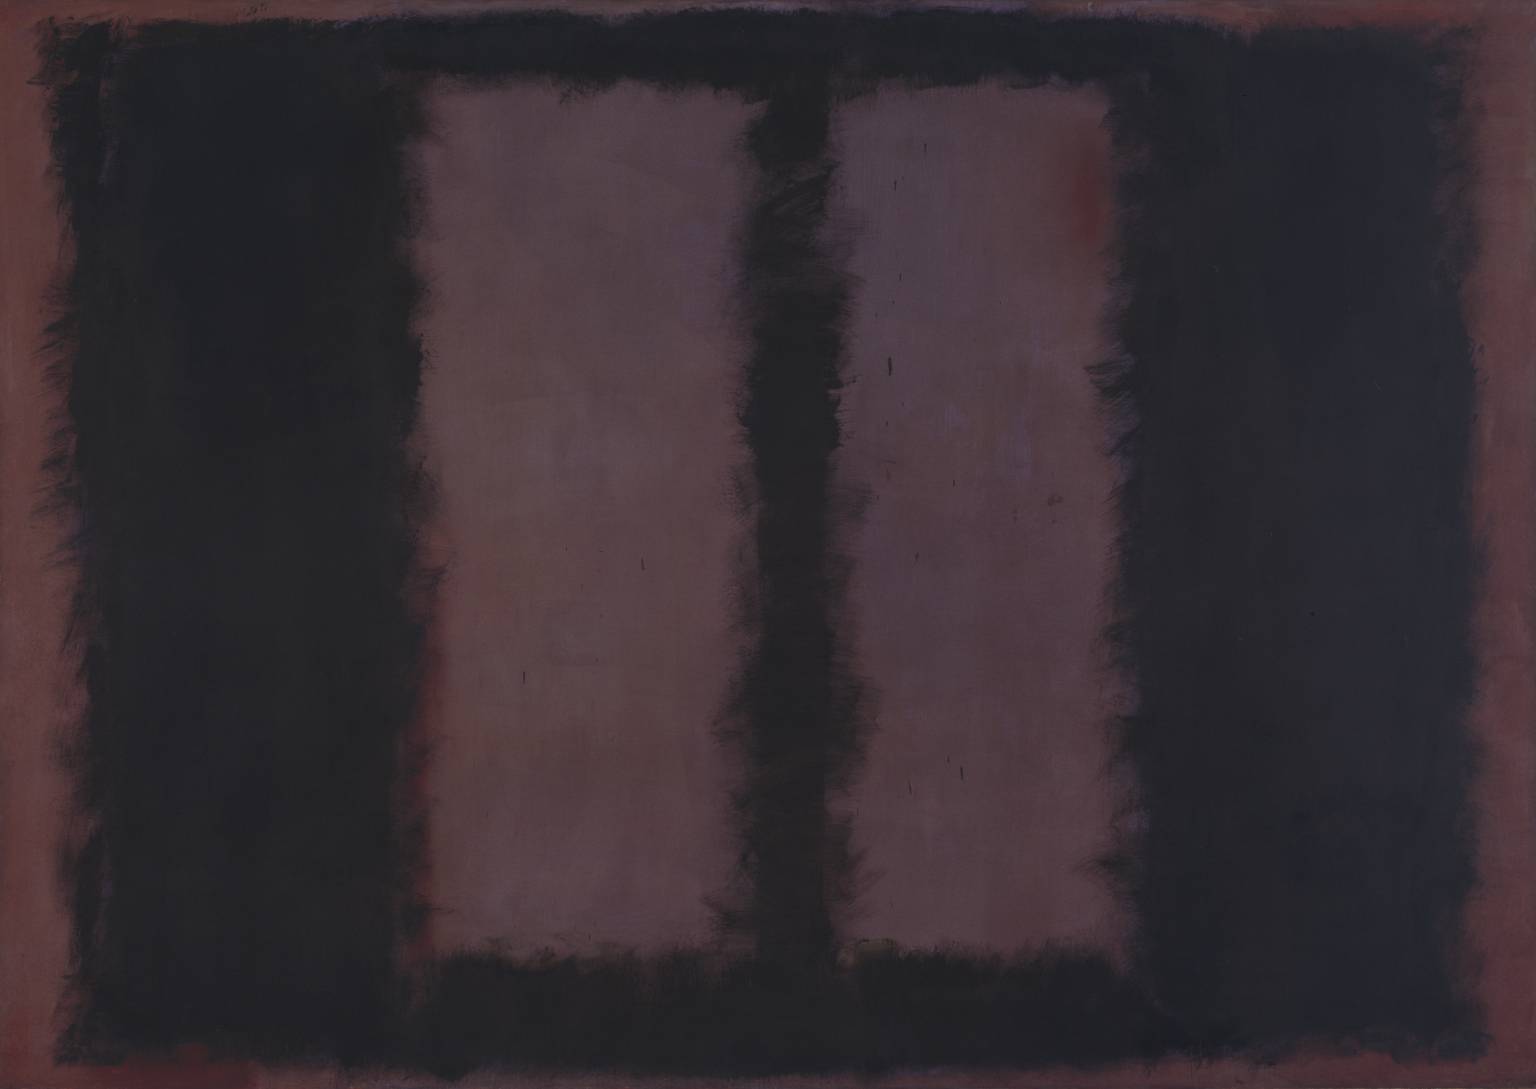 Black on Maroon 1958 Mark Rothko 1903-1970 Presented by the artist through the American Federation of Arts 1968 http://www.tate.org.uk/art/work/T01031